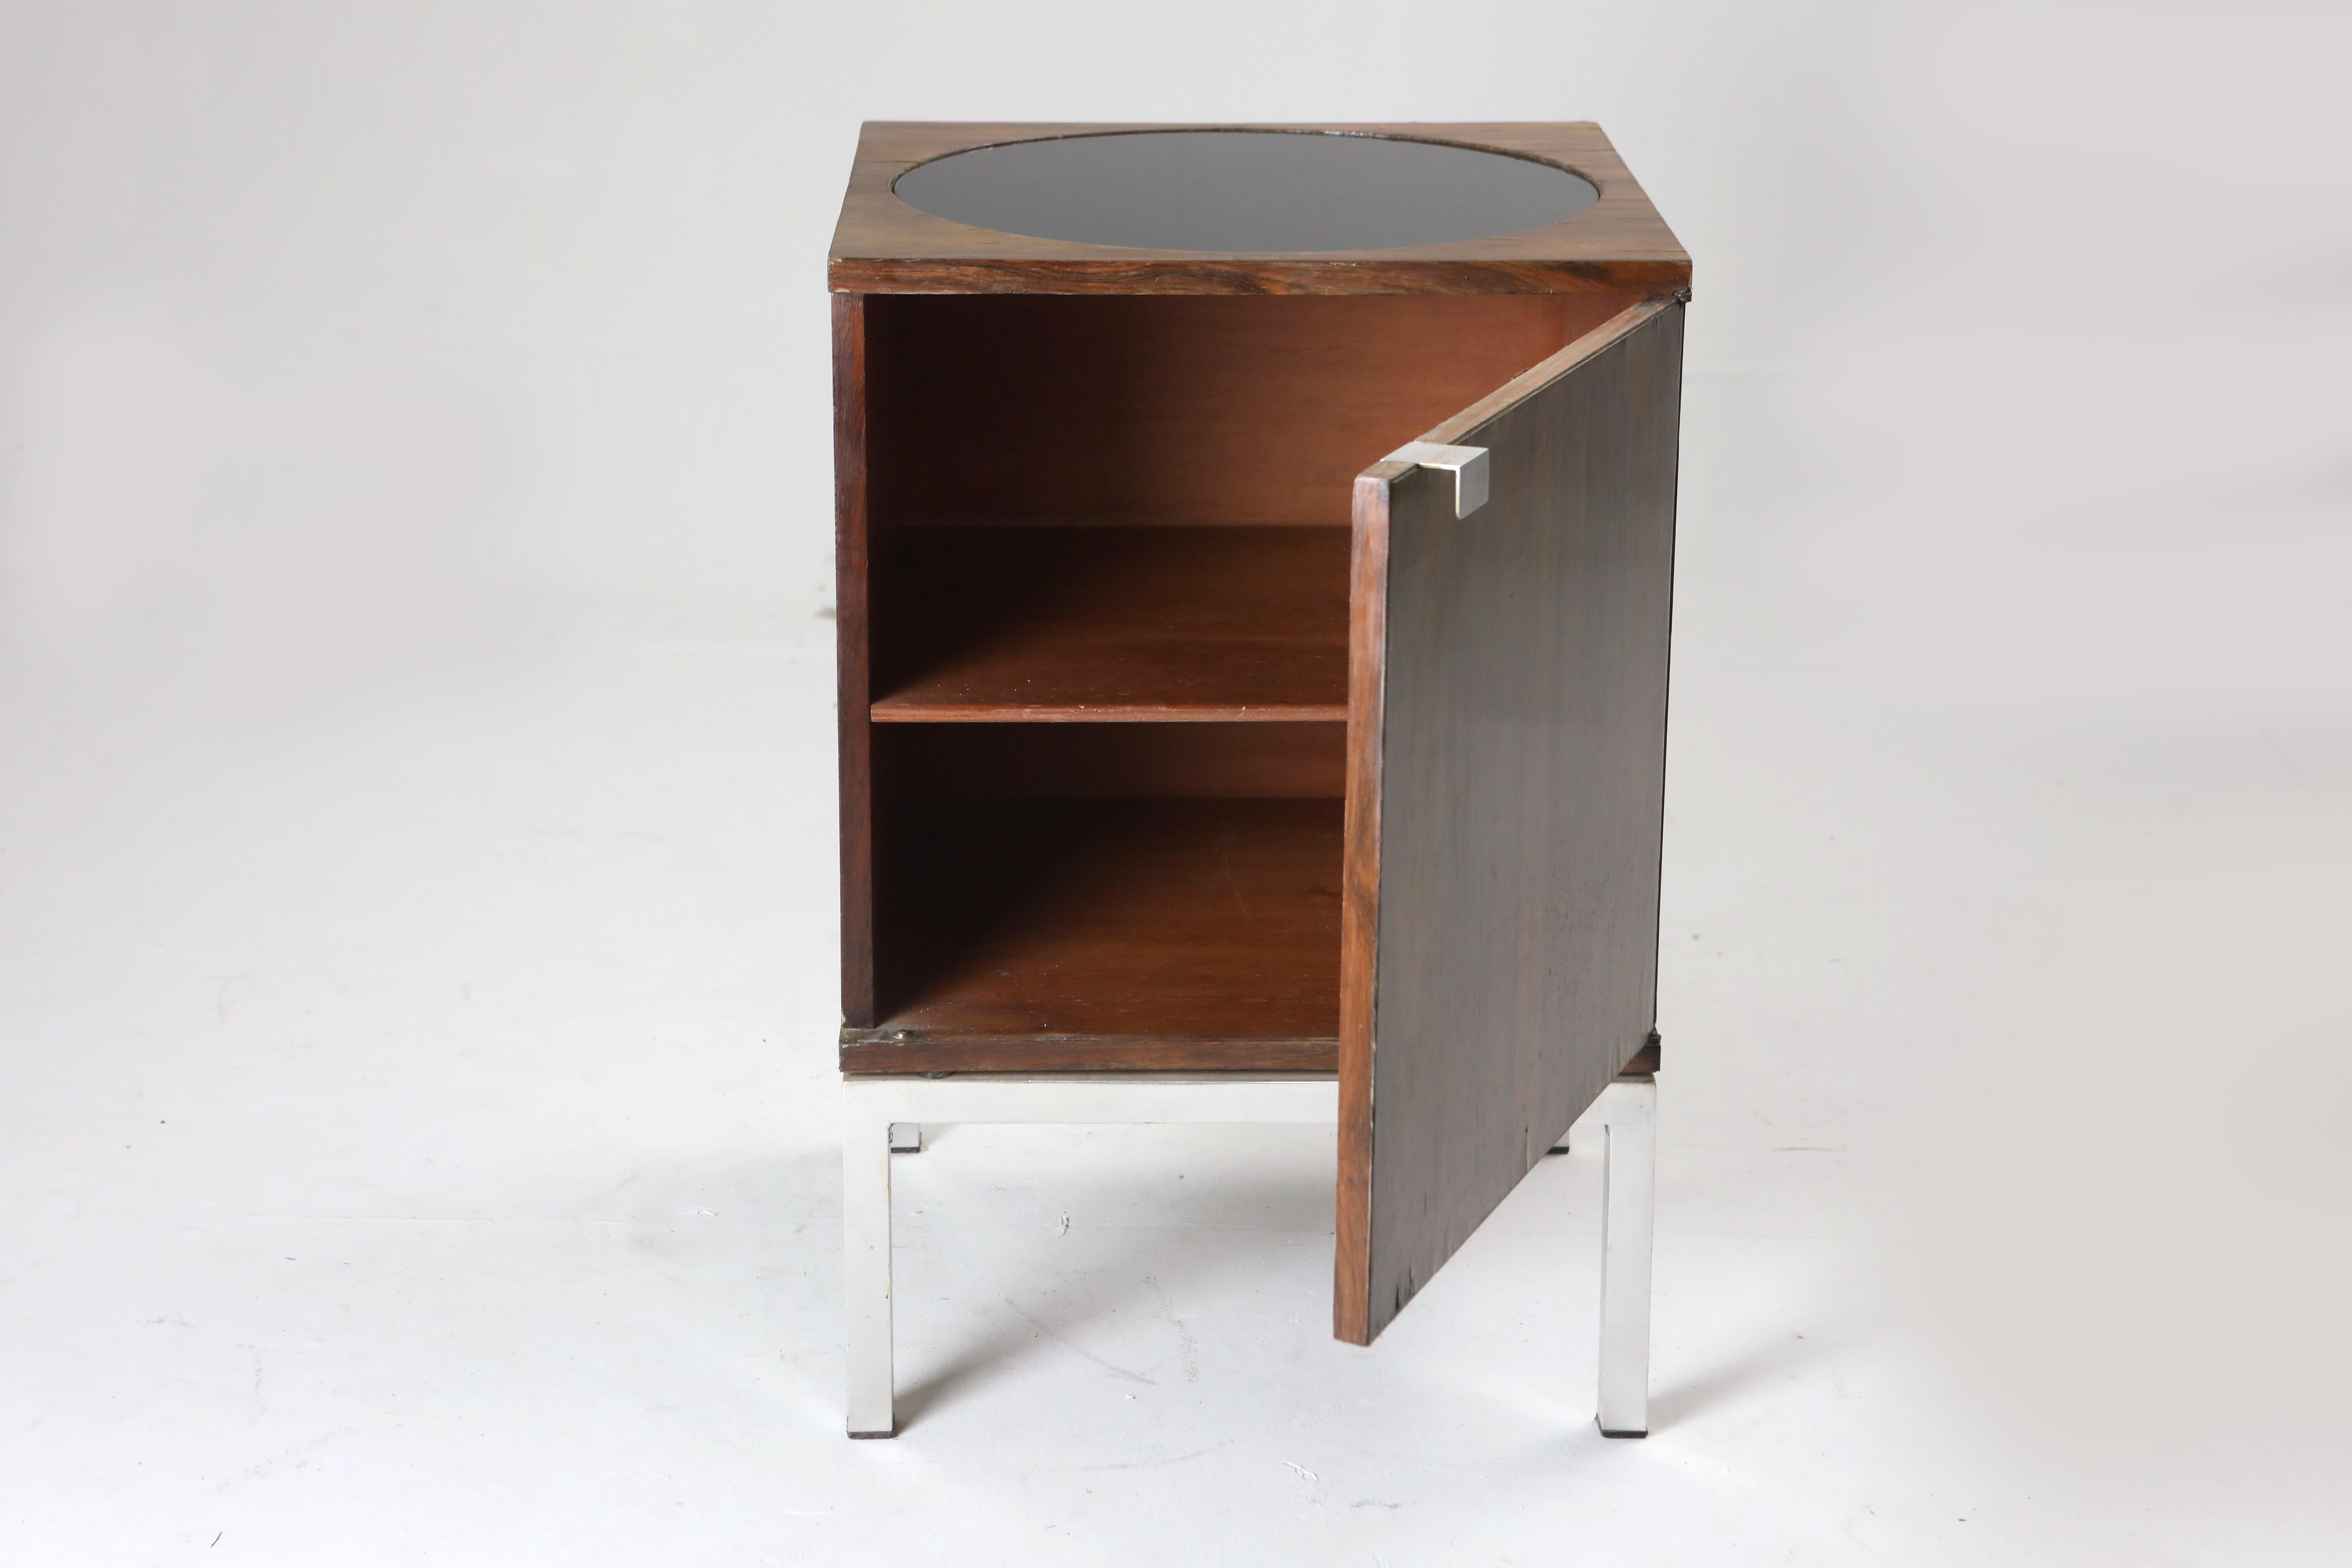 Mid-Century Modern Small Cabinet in Wood by Forma Manufacture, Brazil 1970s.

1970's Small vintage wood cabinet by the Brazilian Forma Manufacture featuring a circle painted glass top and chromed iron feet.